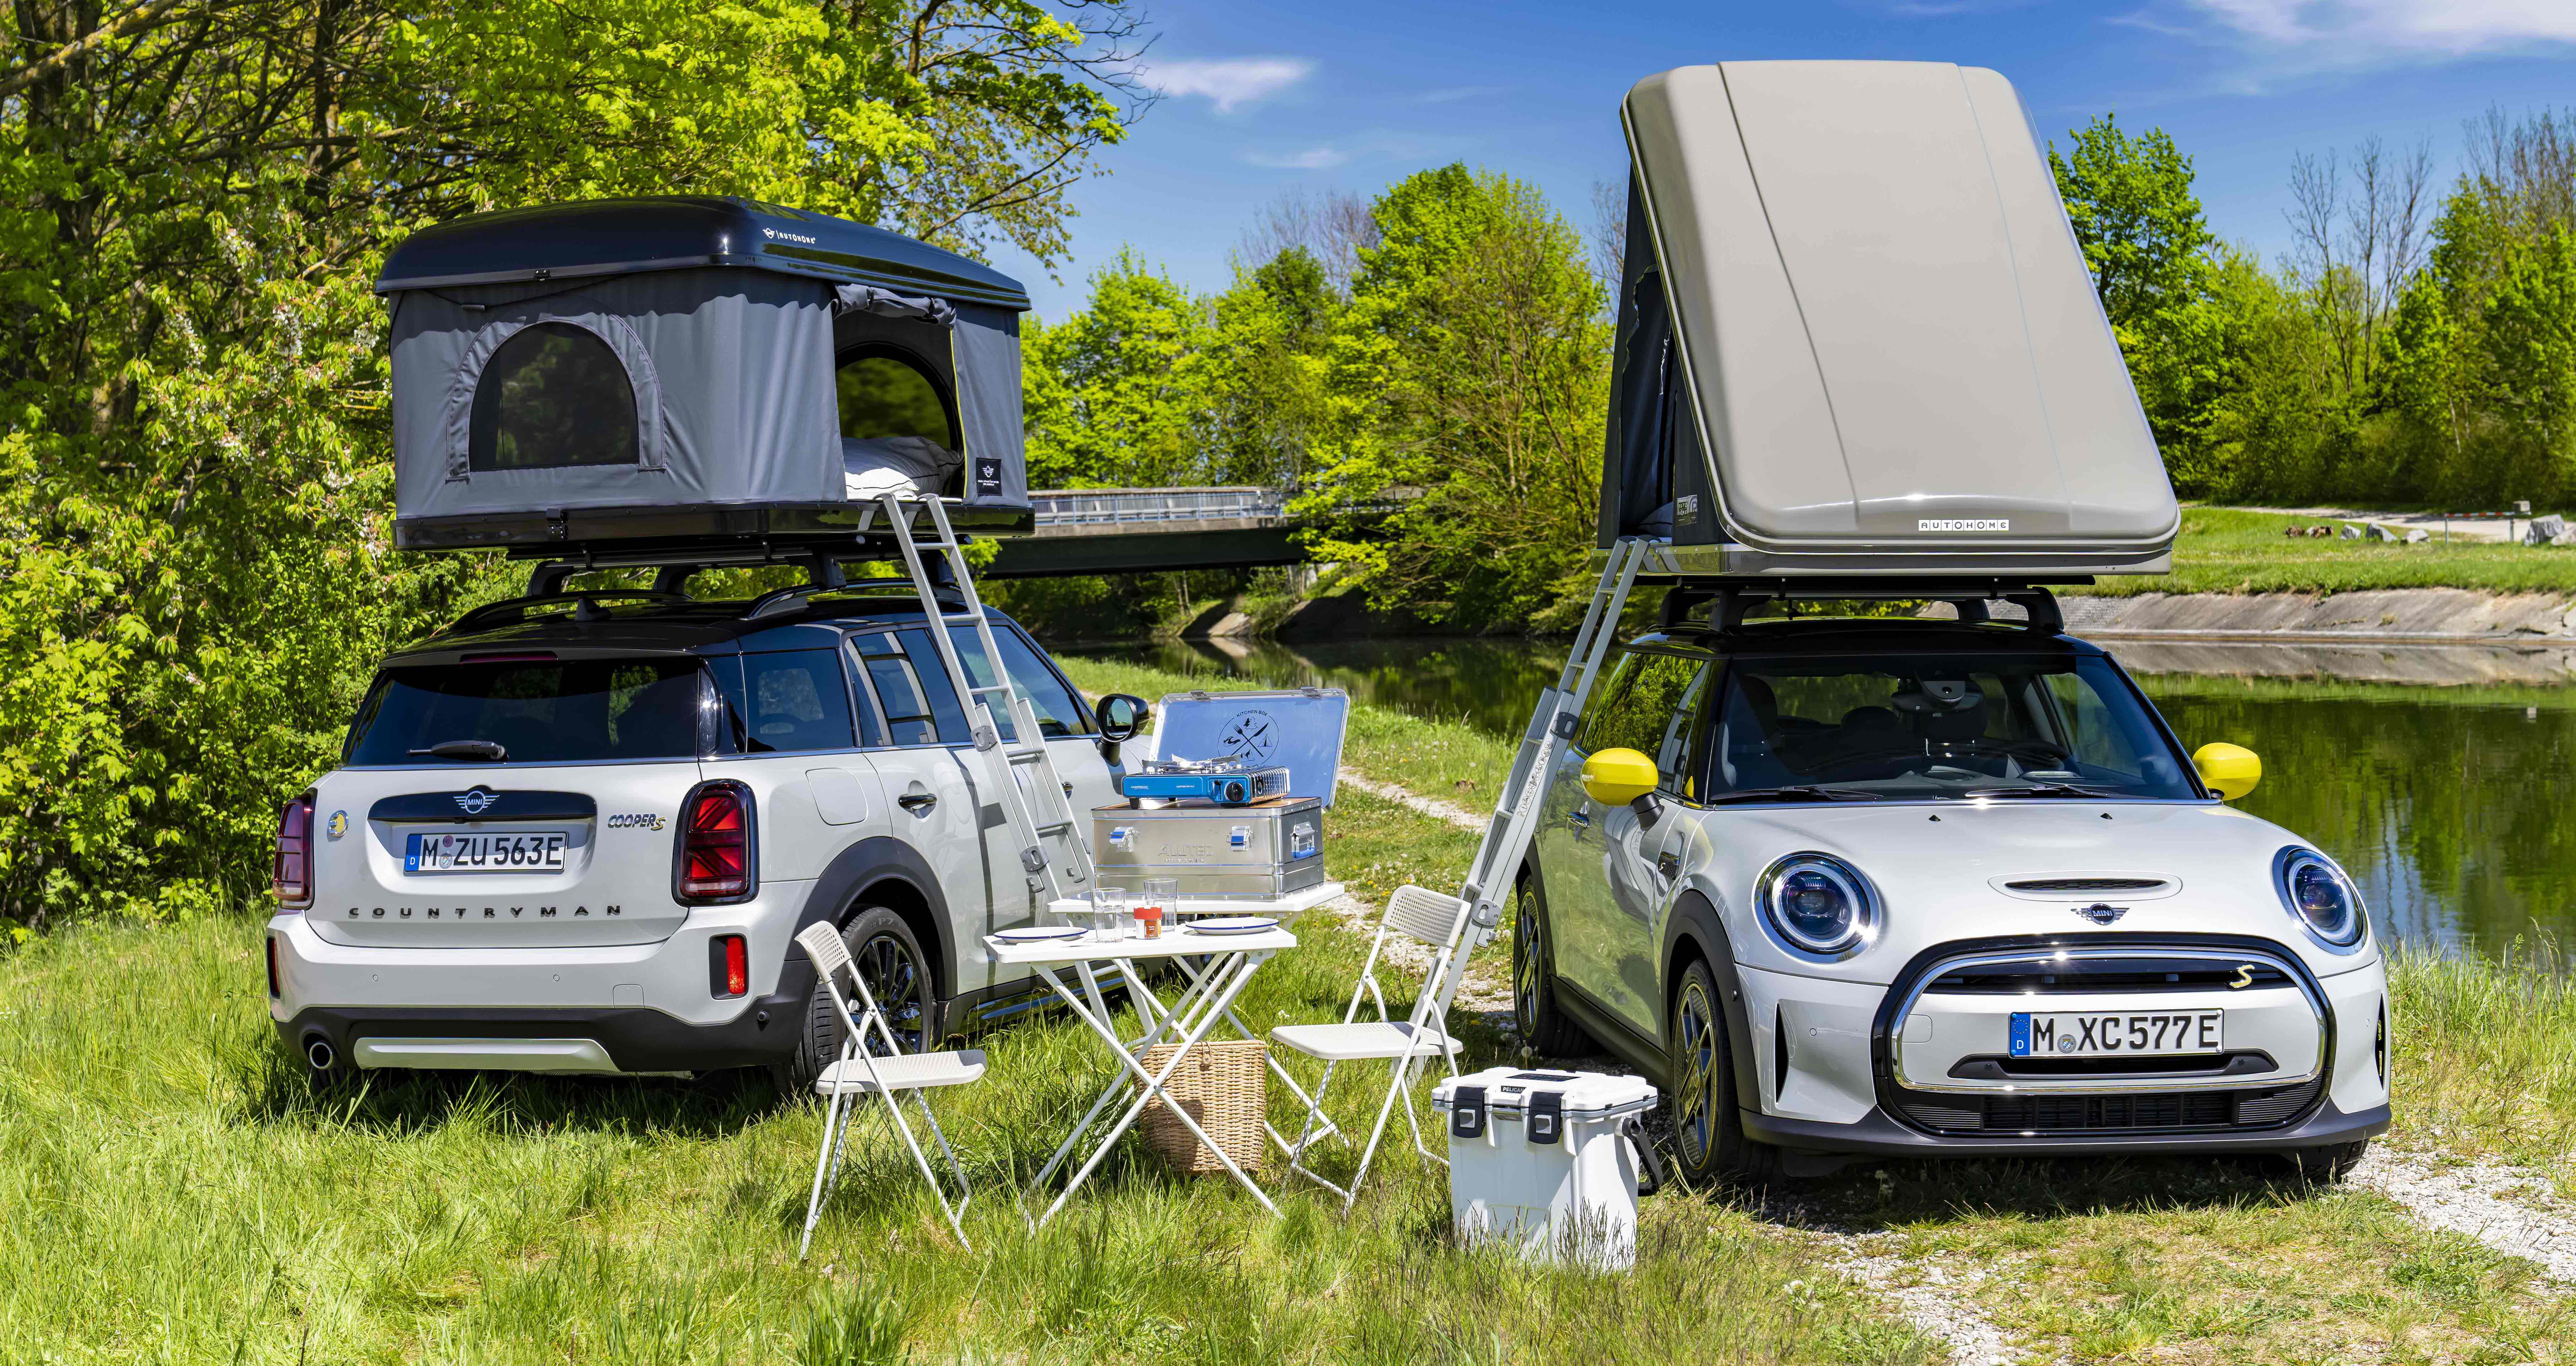 Mini goes on holiday - with the greenest camper fleet in the world.